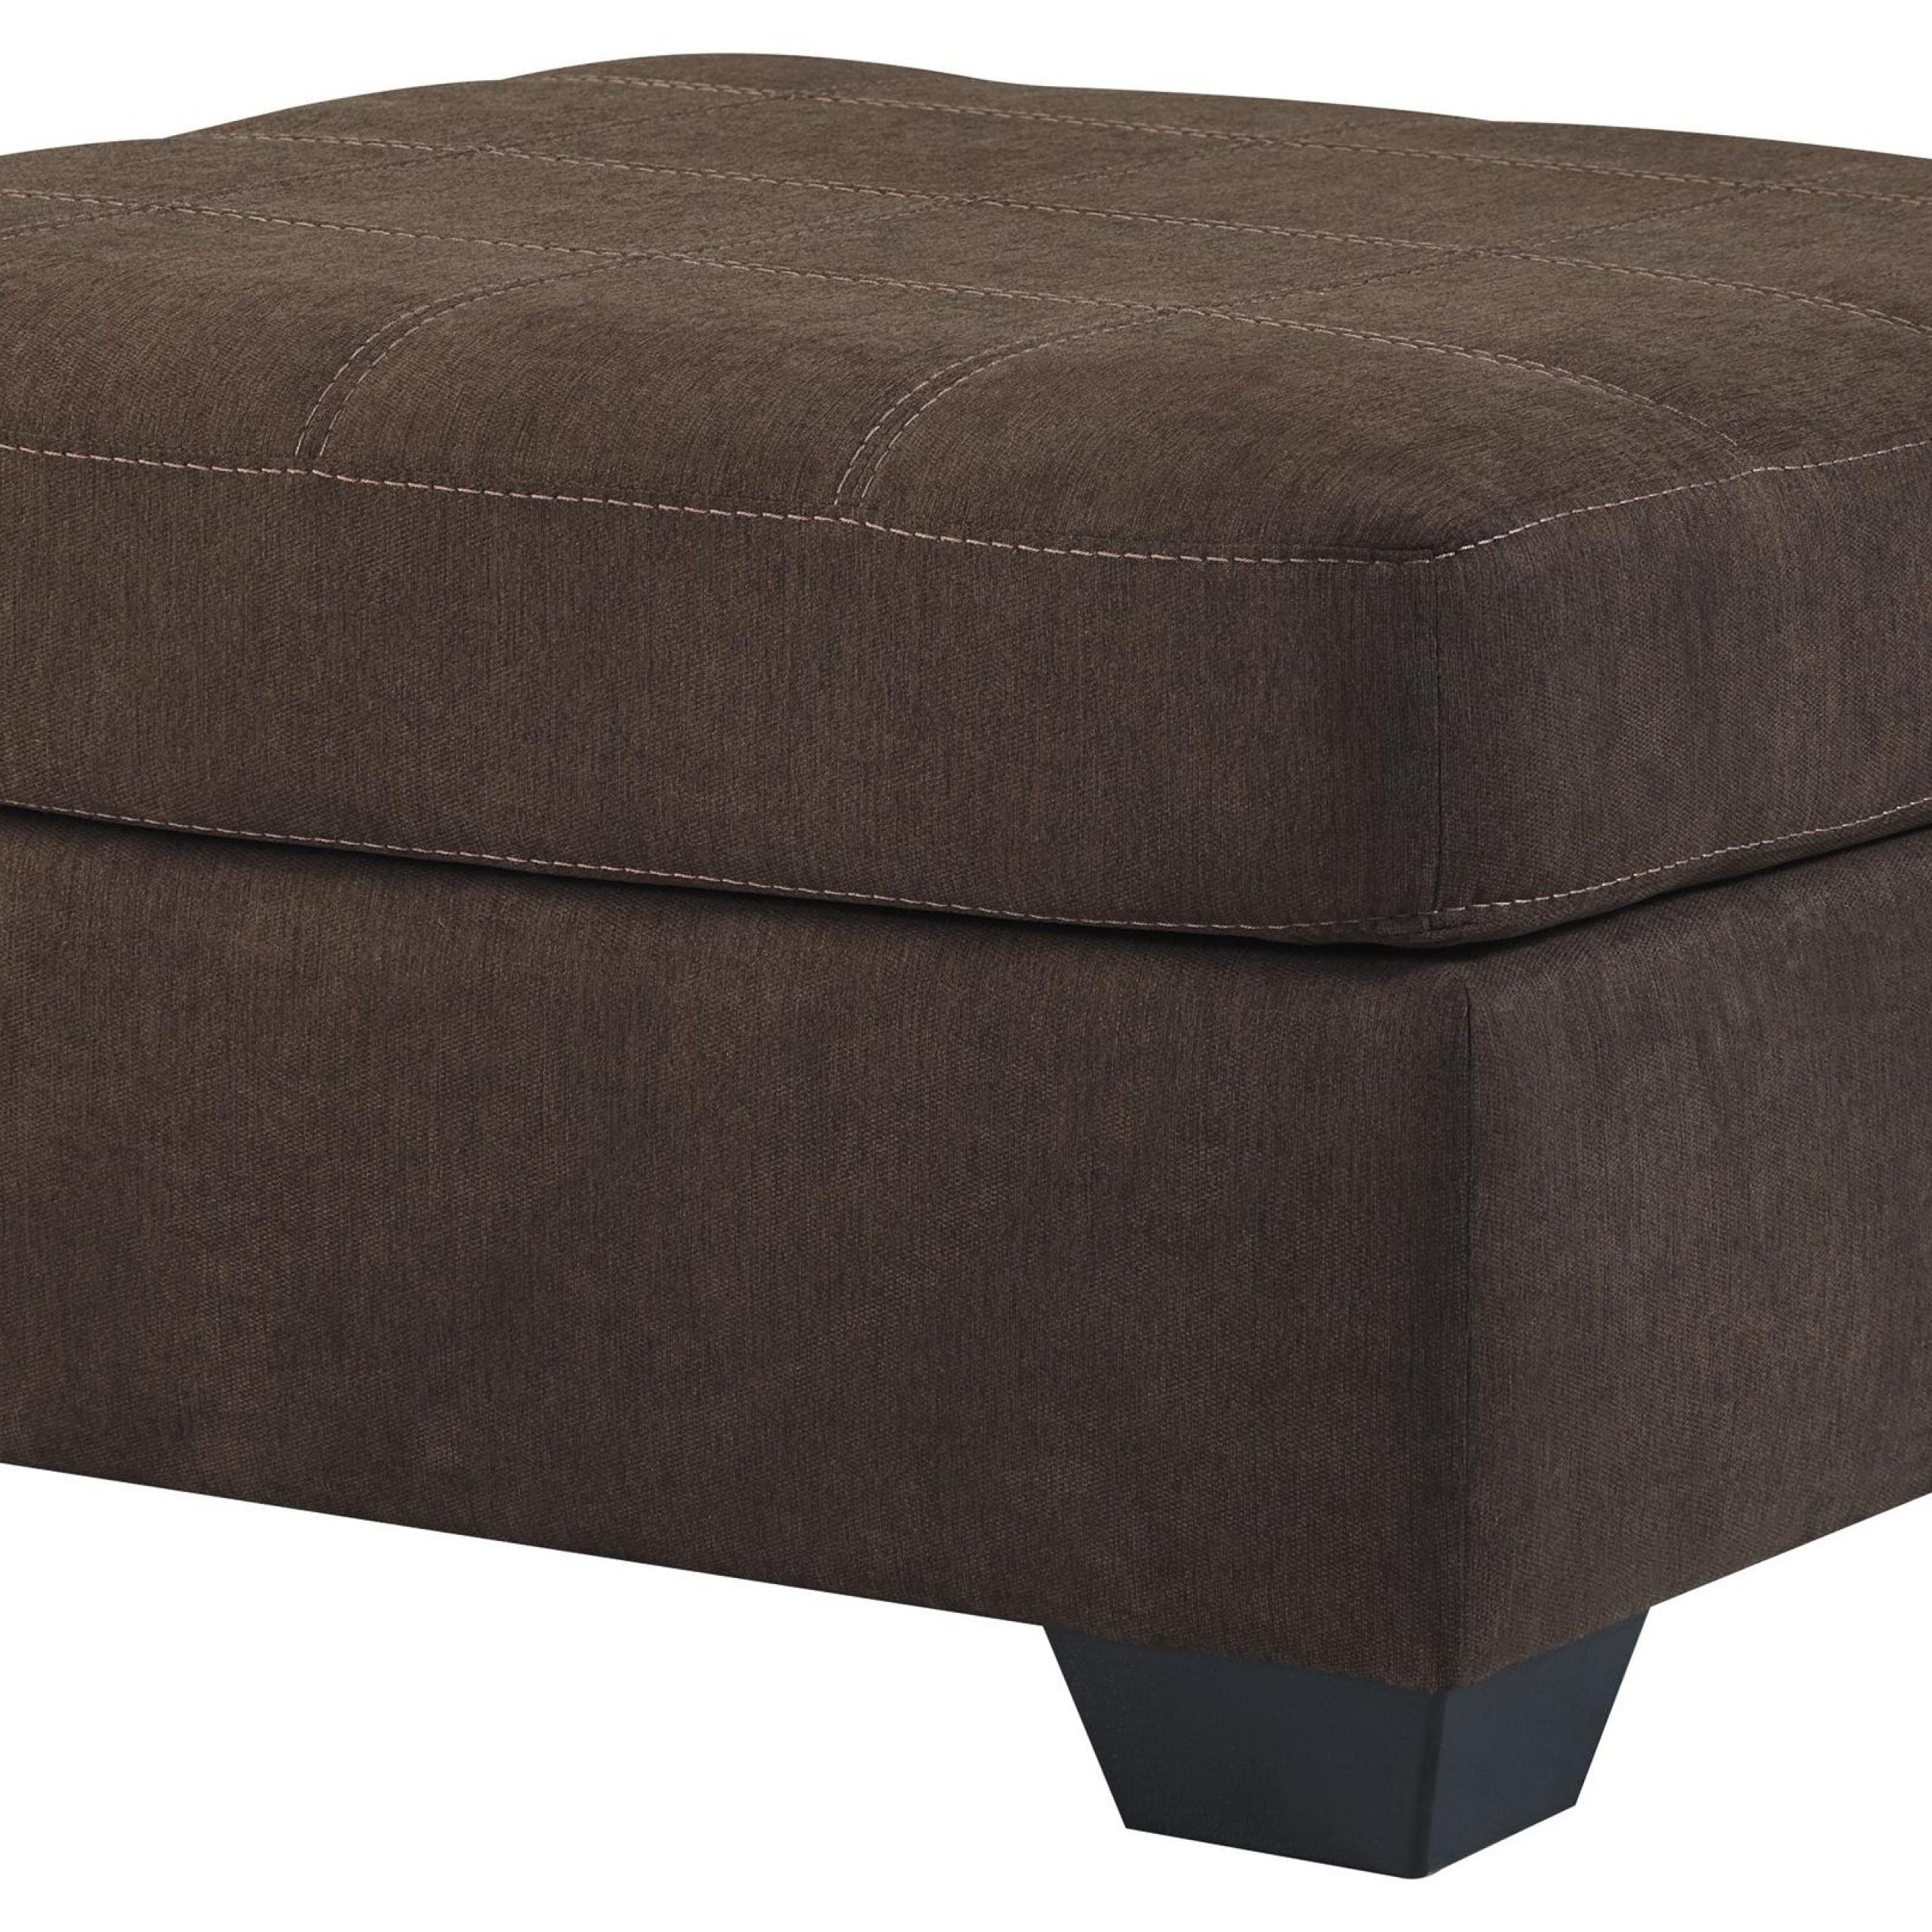 Benchcraft Maier – Walnut 4520108 Contemporary Square Oversized Accent Regarding Most Recently Released Fabric Oversized Pouf Ottomans (View 9 of 10)